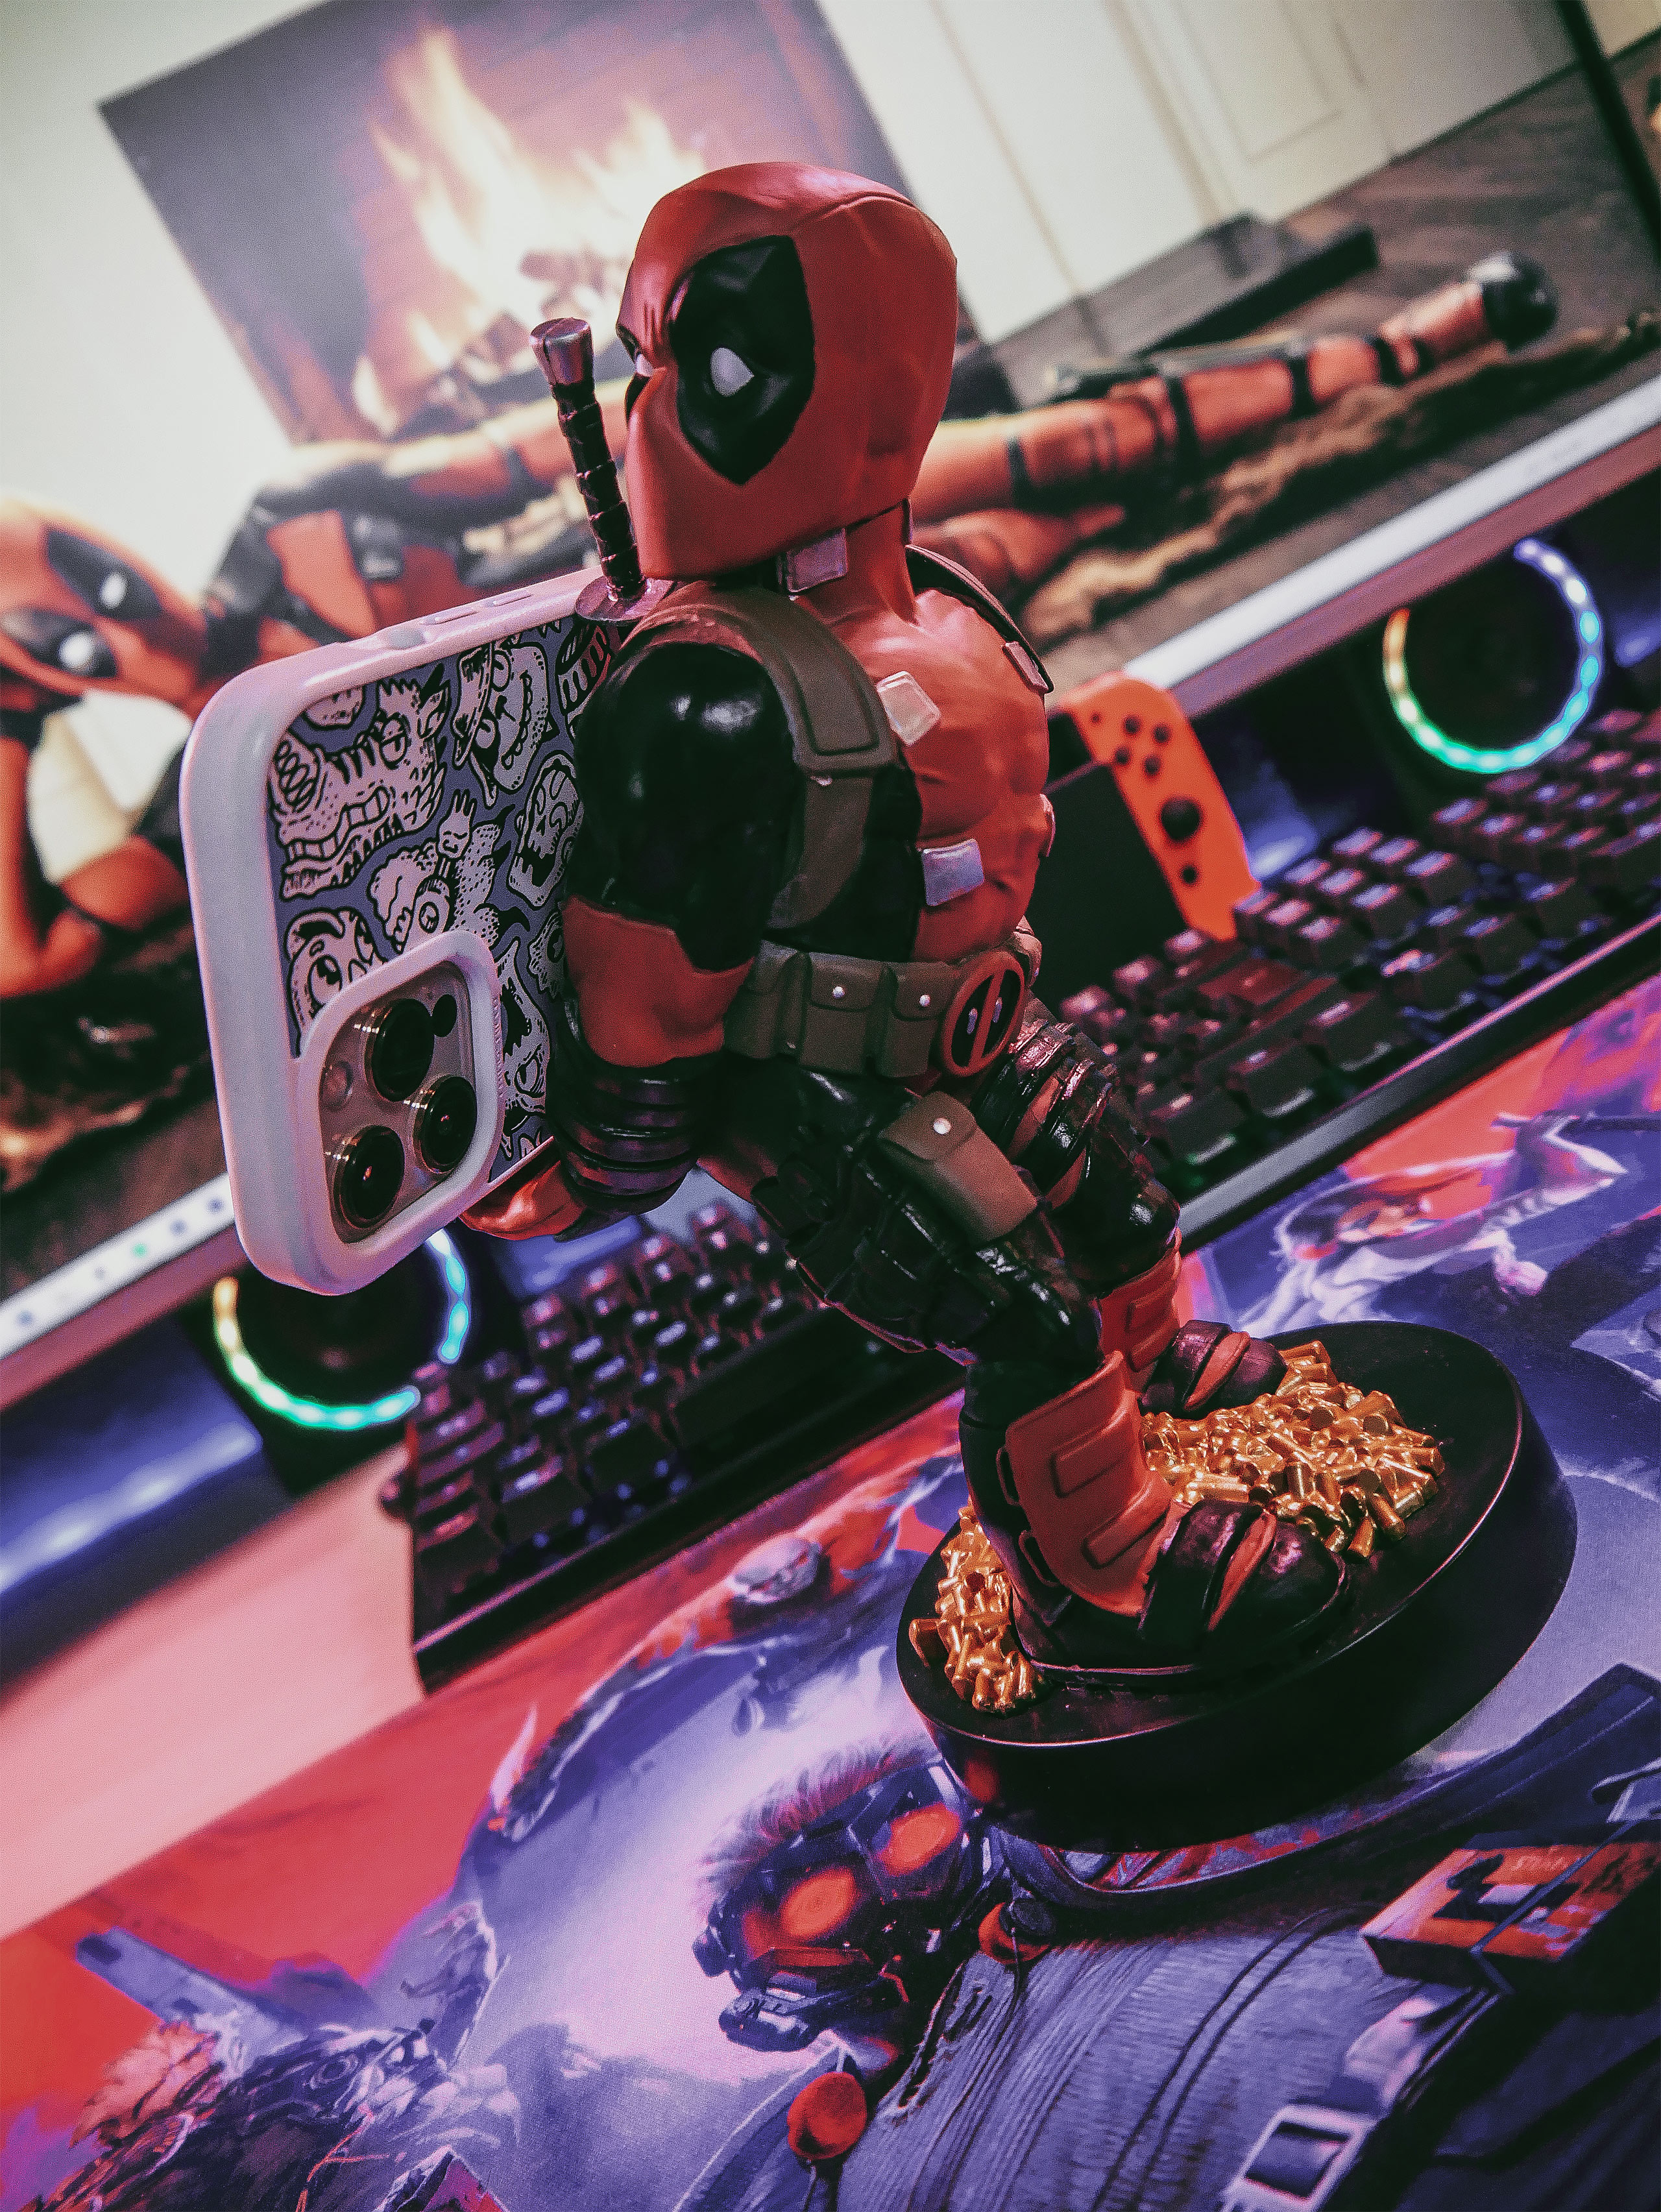 Deadpool 2019 - Cable Guy Figuur